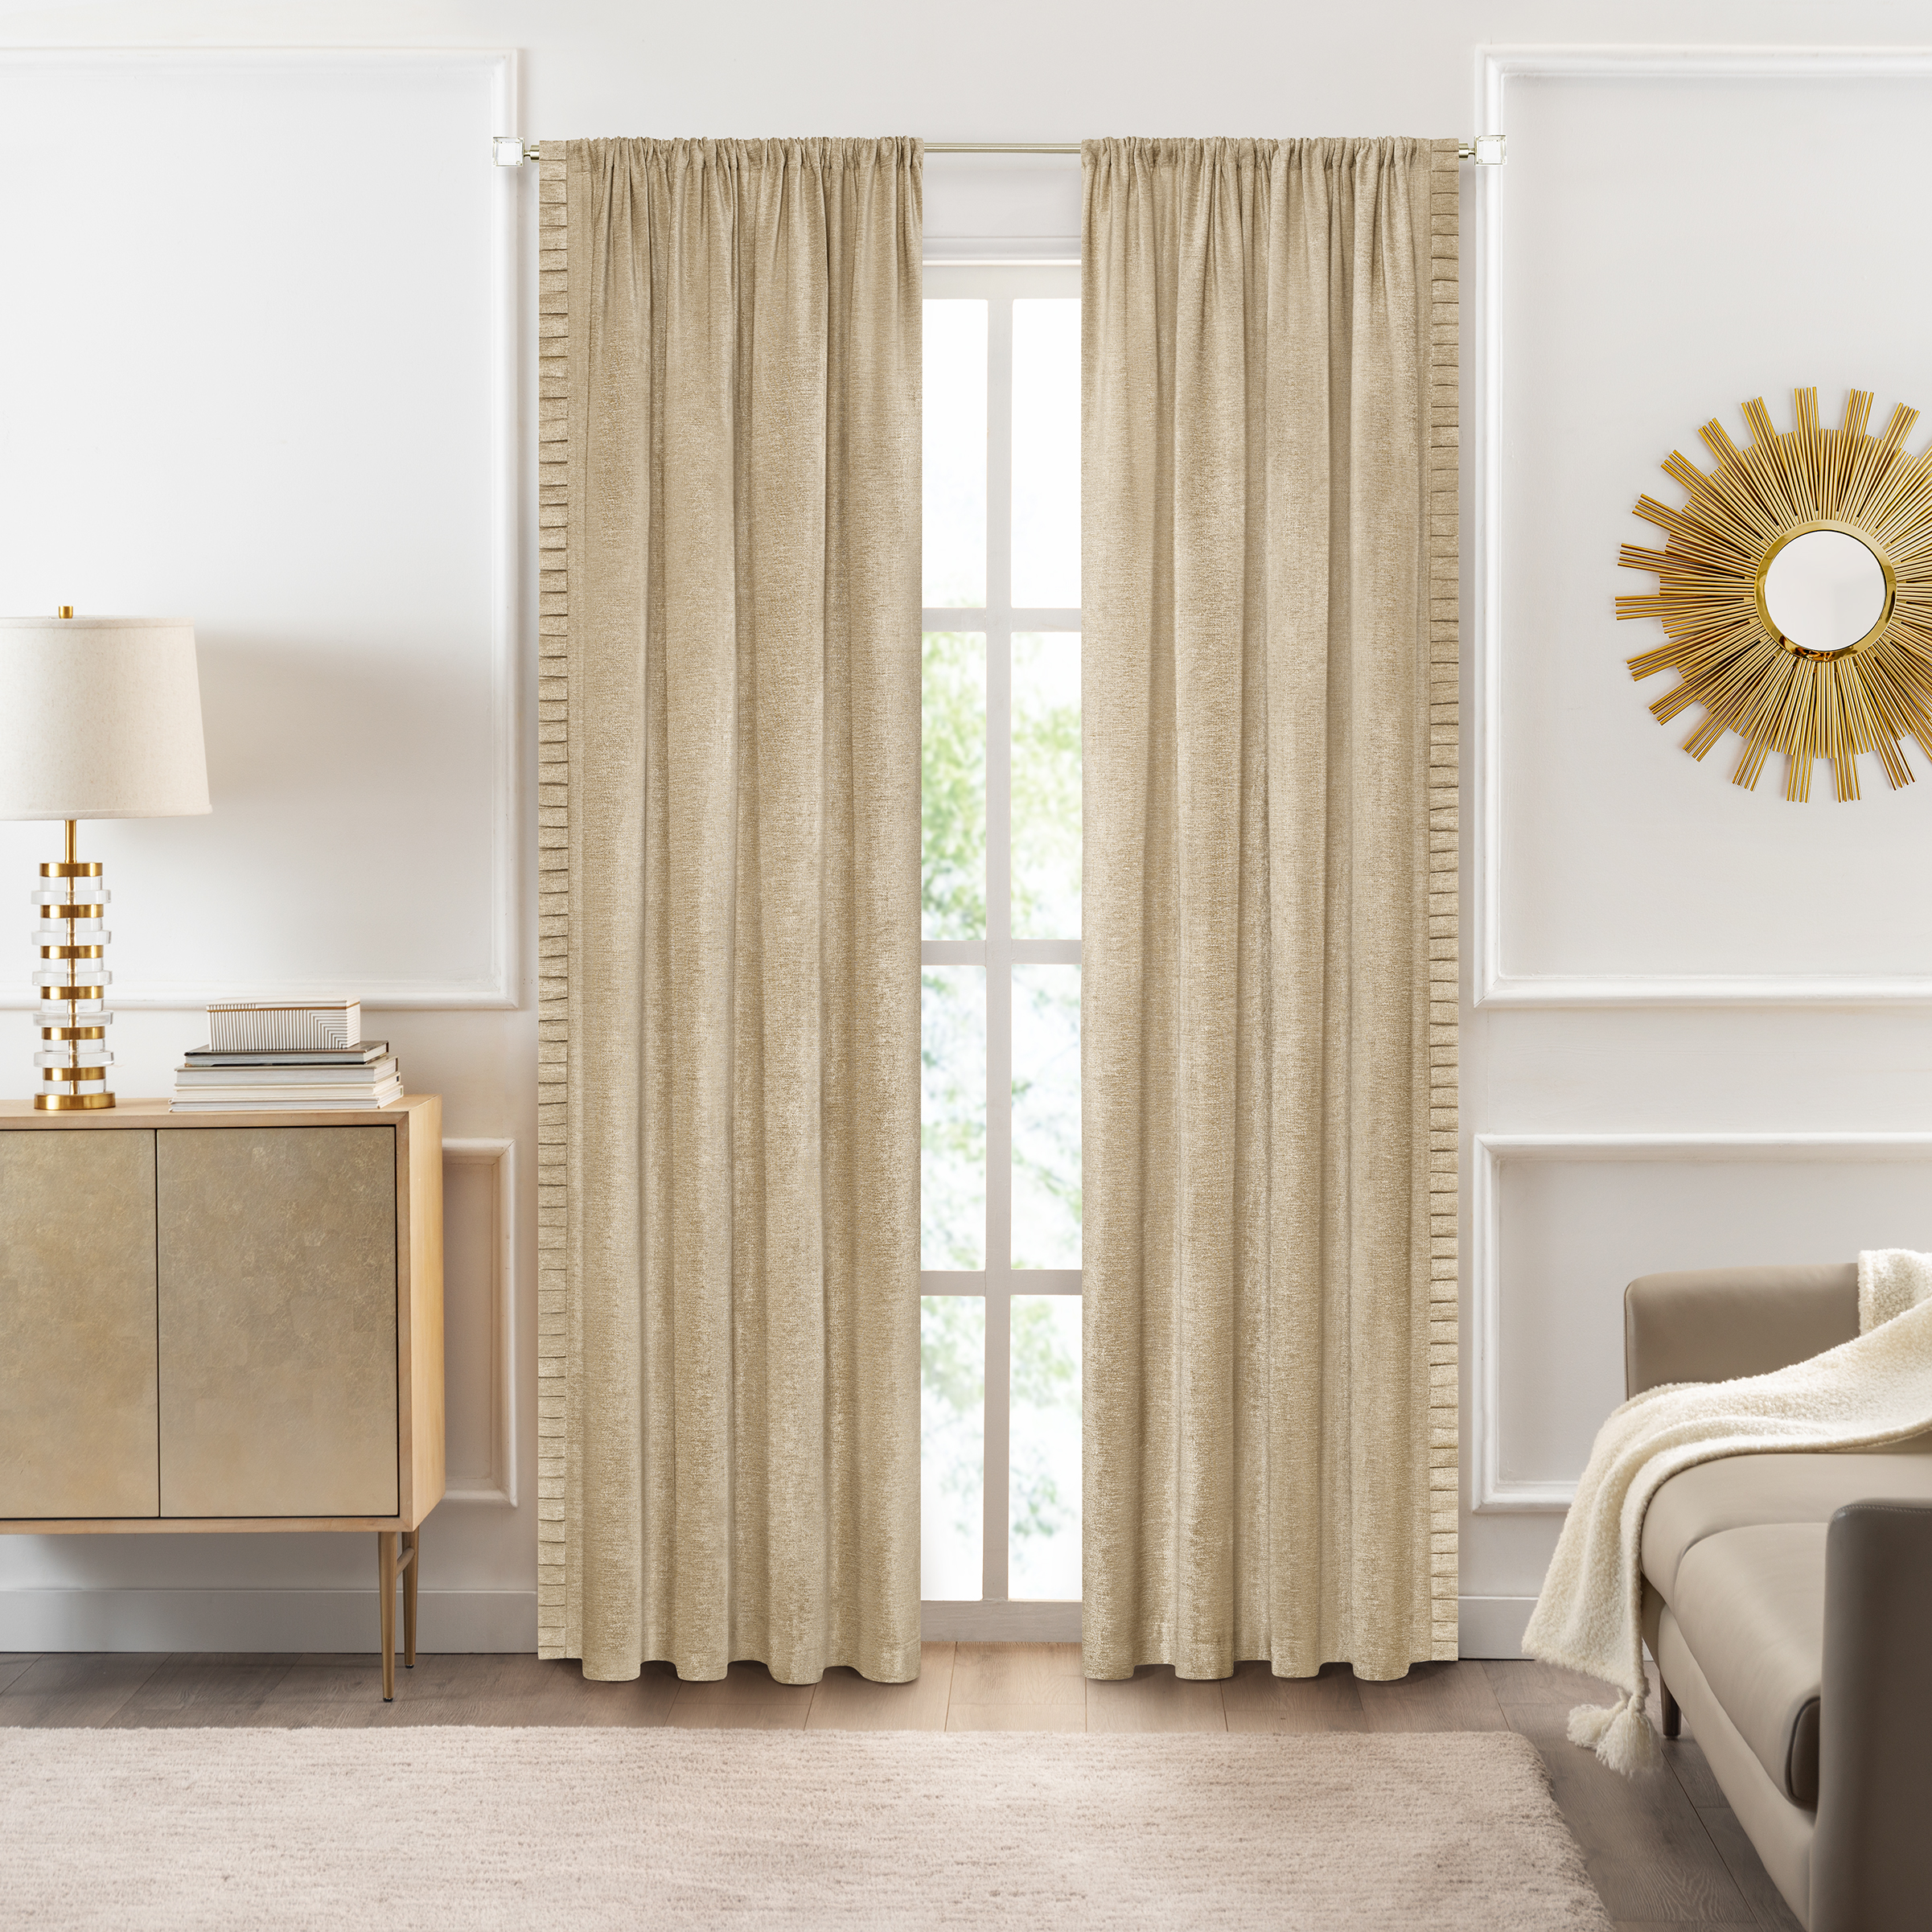 Achim Bordeaux Indoor Polyester Light Filtering Solid Curtain Panel, Tan, 52-in W x 63-in L - image 1 of 7